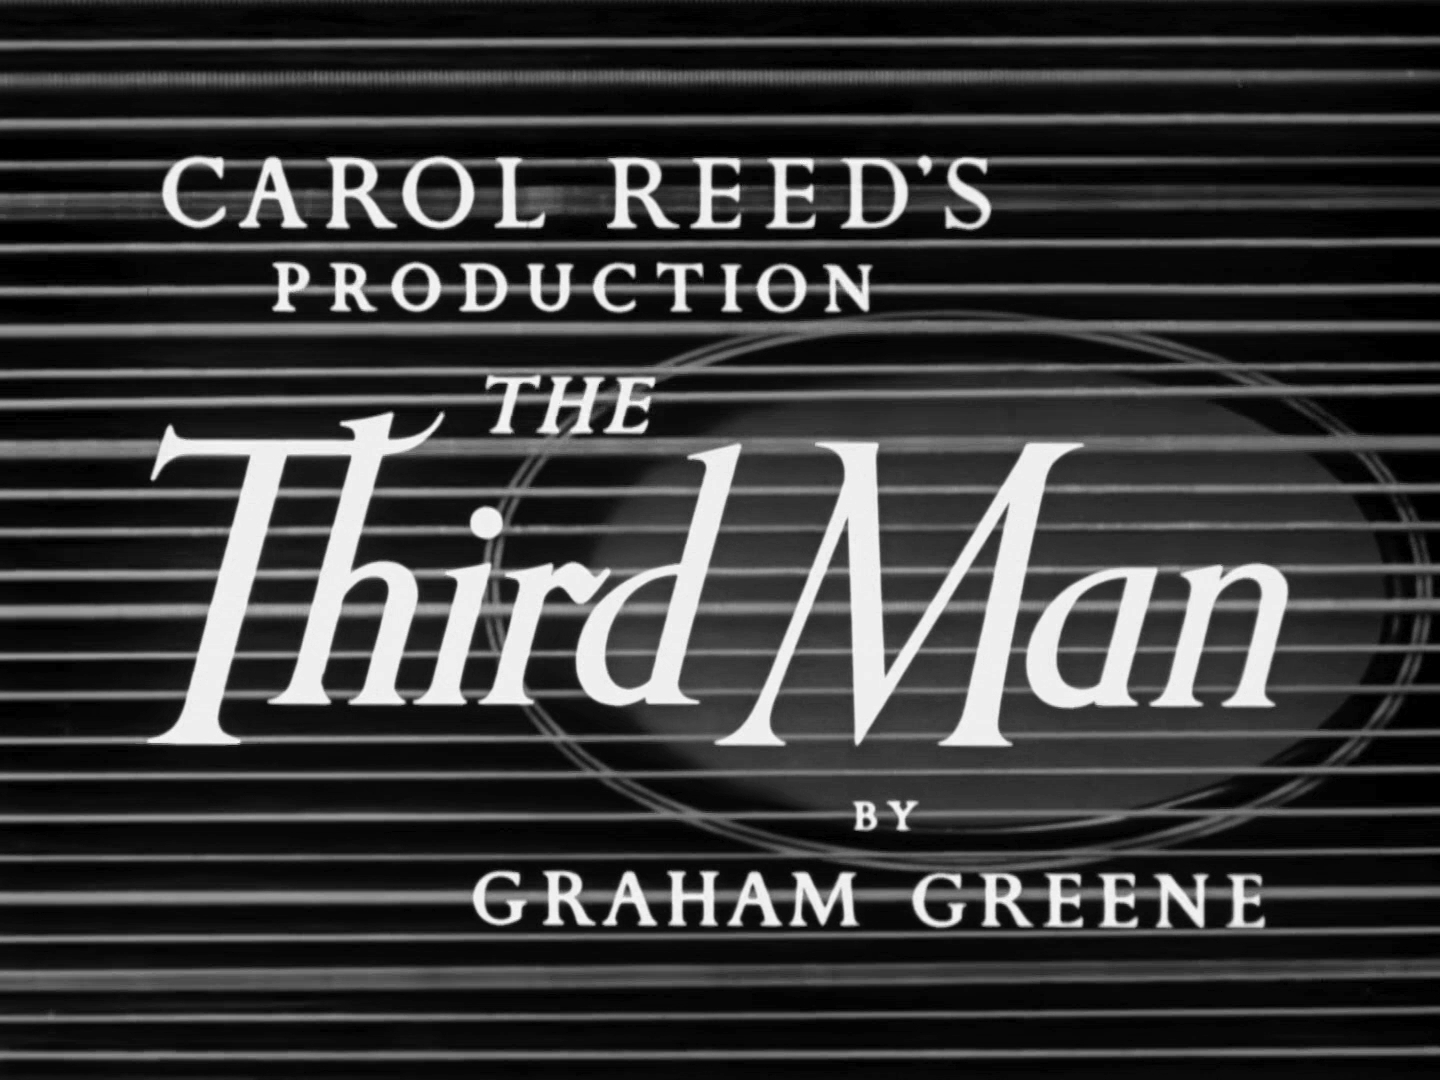 Main title from The Third Man (1949). Carol Reed’s production by Graham Greene (4)